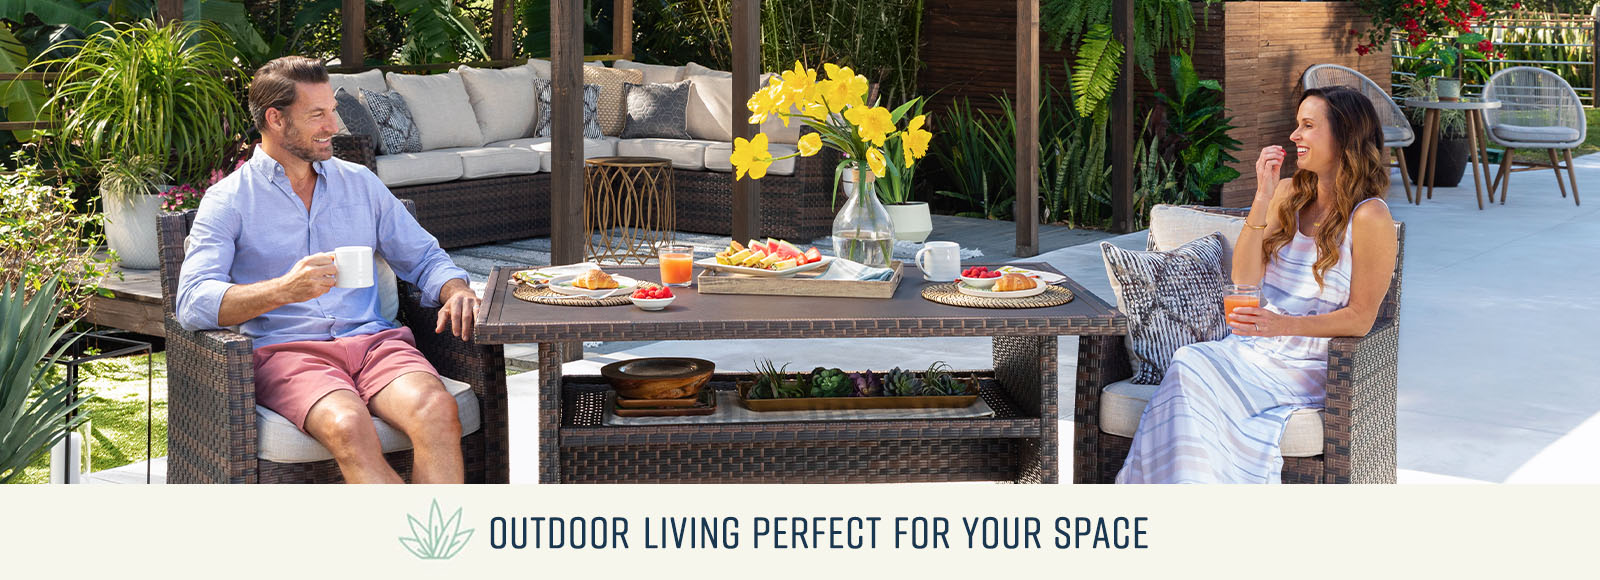 Outdoor Living Perfect for your Space